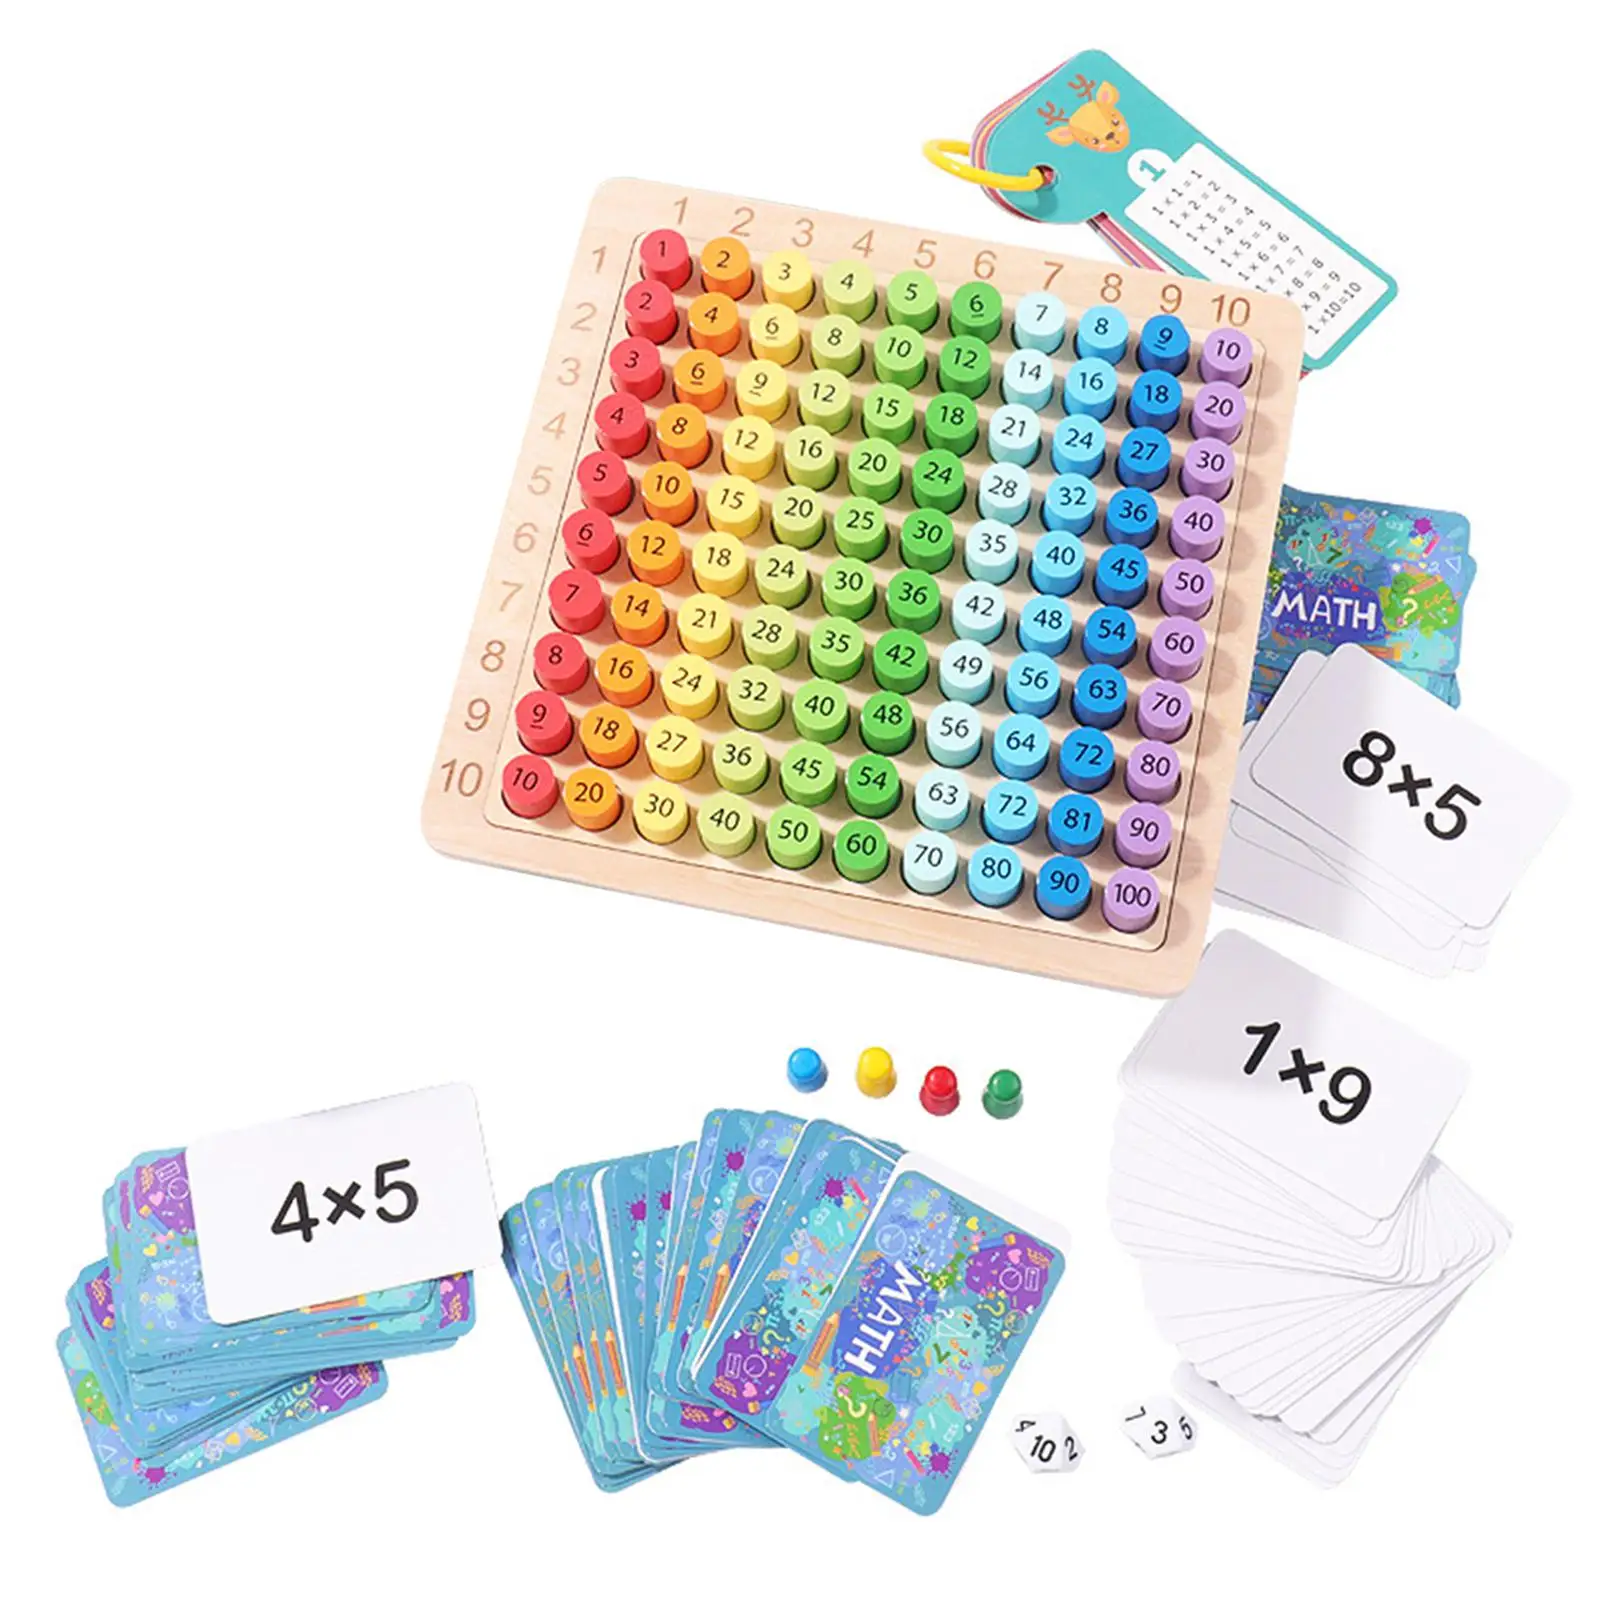 Multiplication Board Game Math Education Materials Counting for Teaching